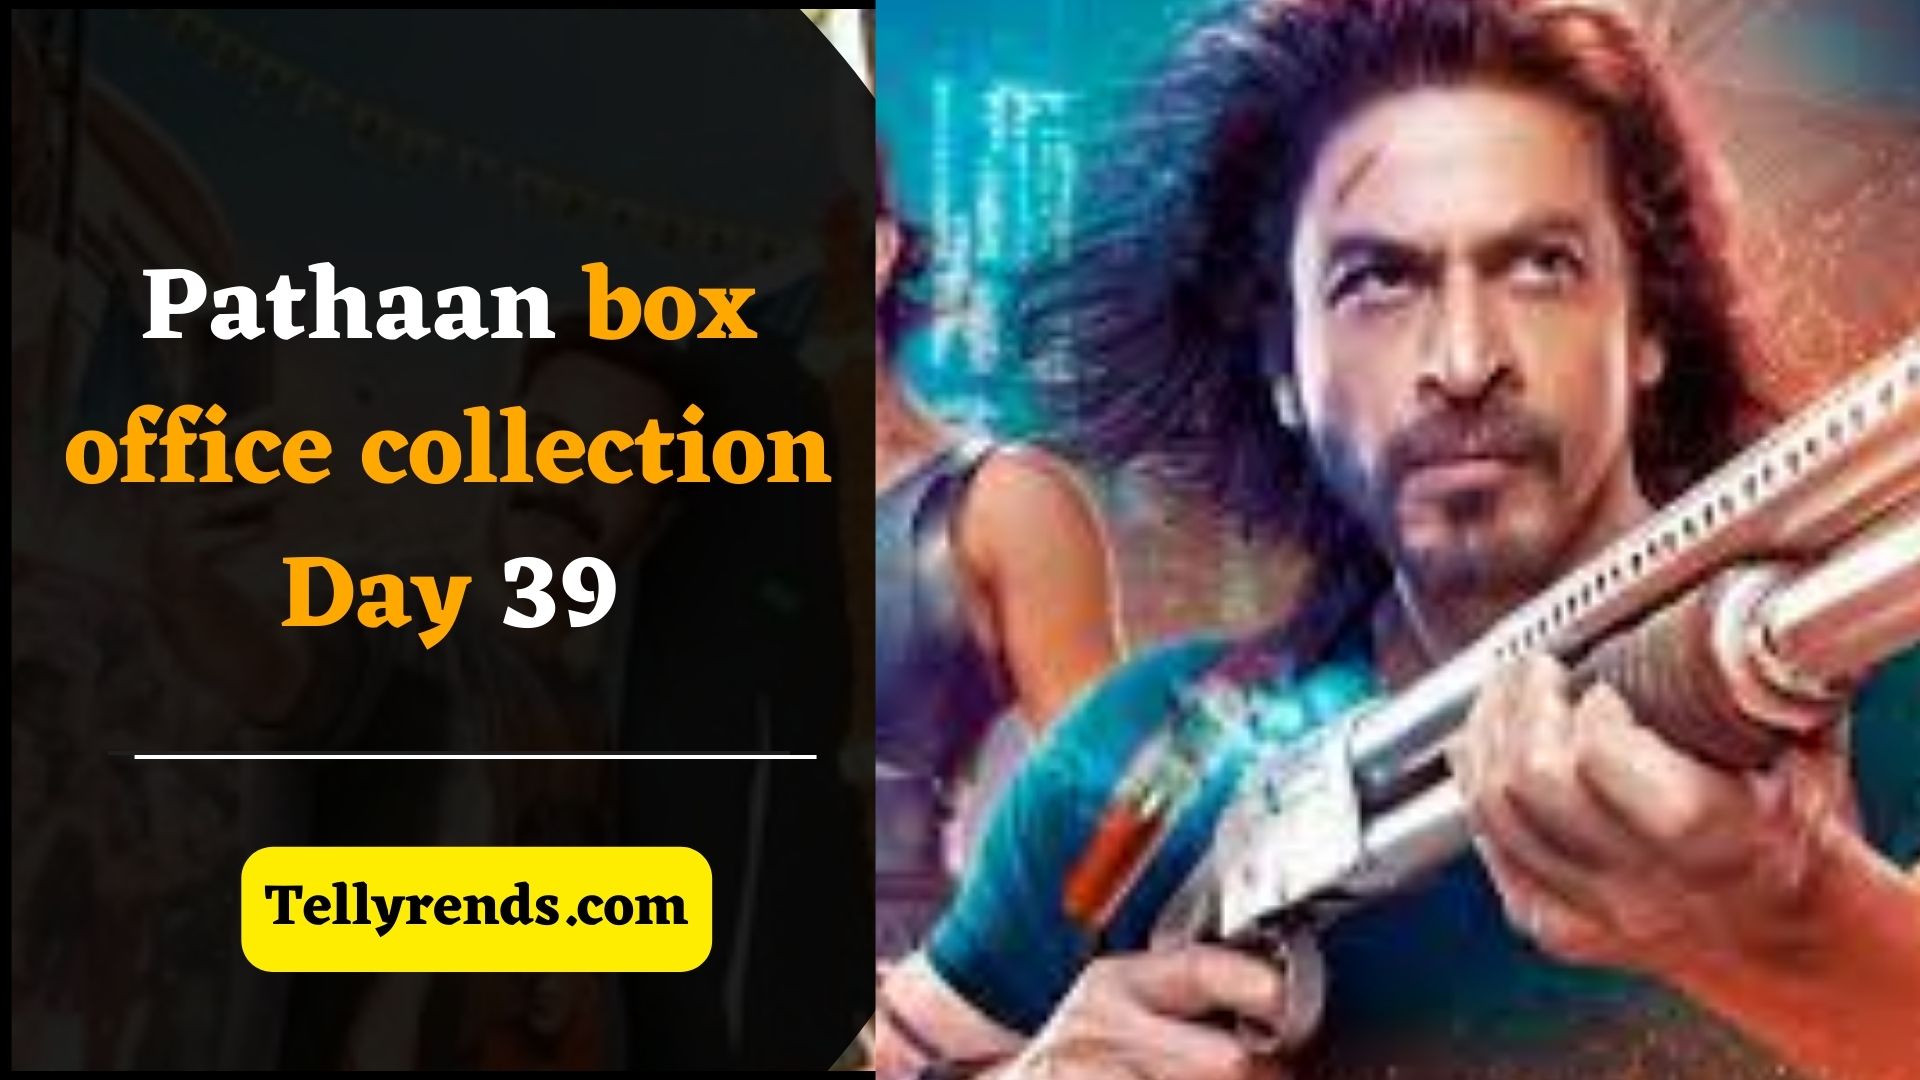 Pathaan box office collection Day 39